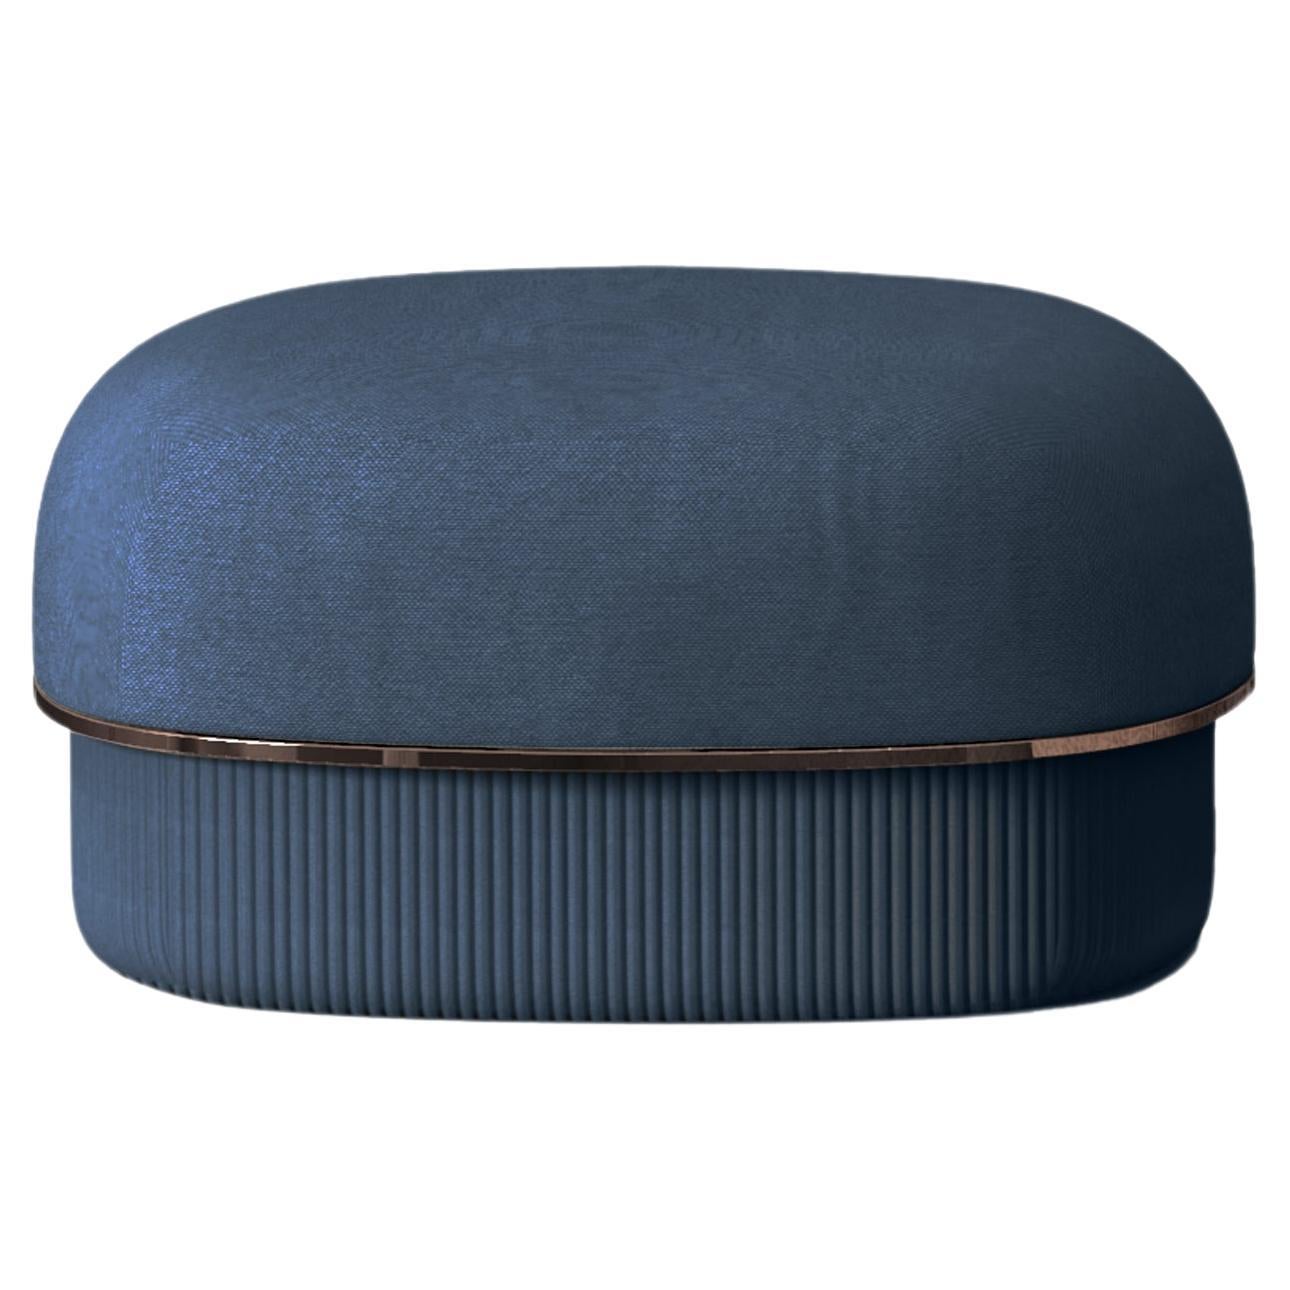 Modern Gentle Small Pouf in Blue Fabric and Bronze Metal